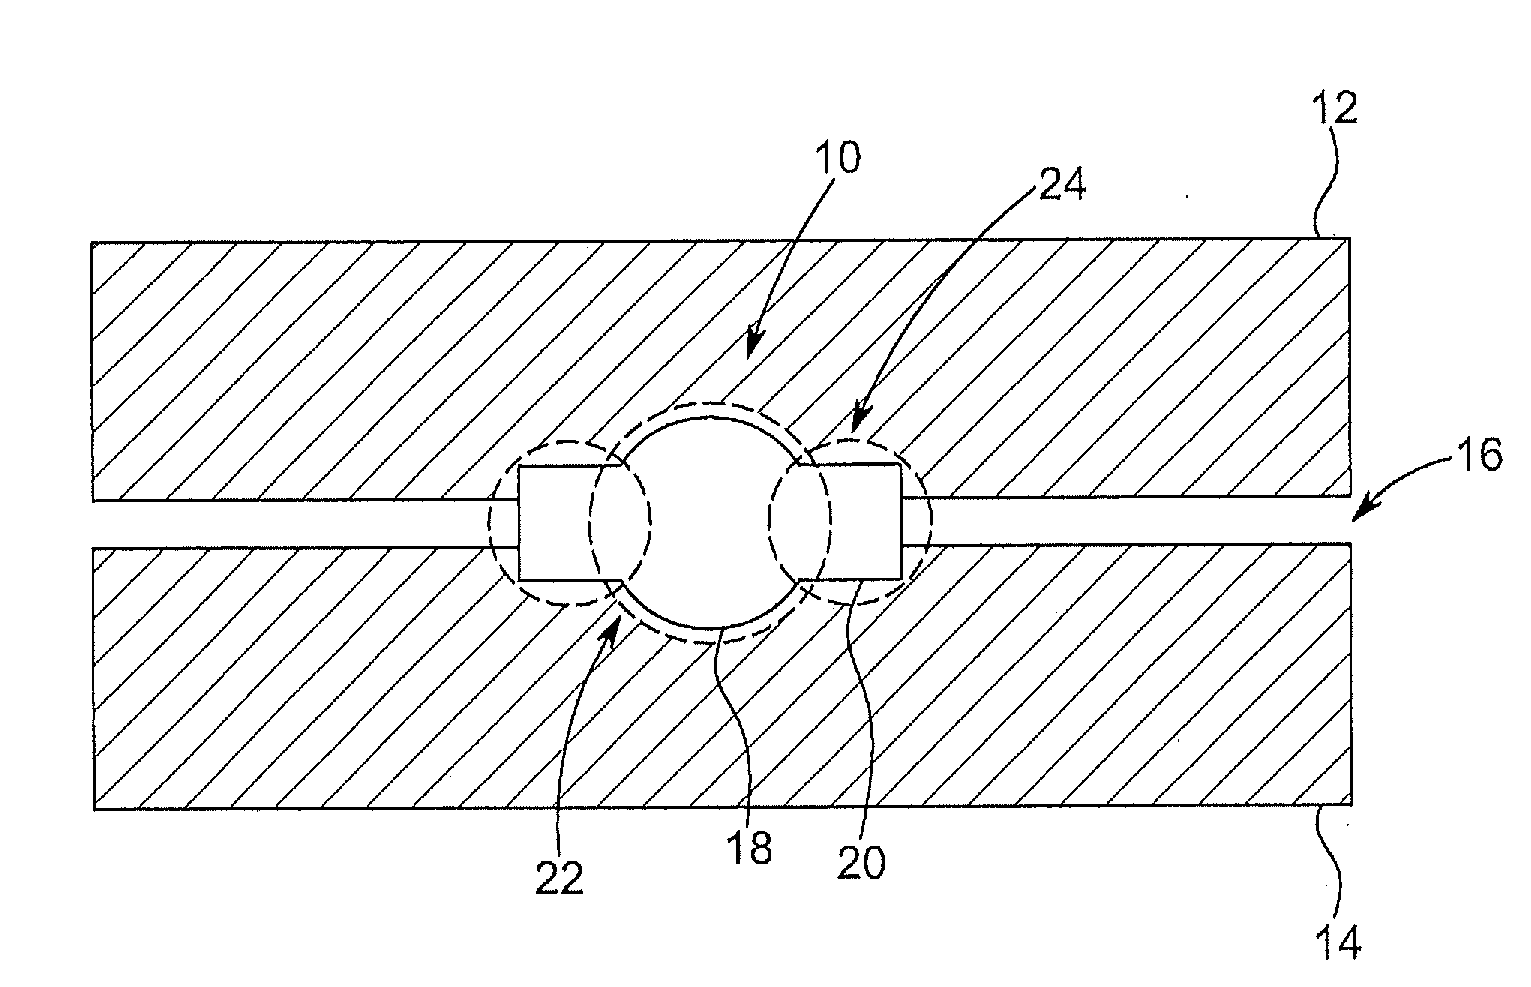 Surgical implant device and surgical implant insertion assembly for the translation and fusion of a facet joint of the spine